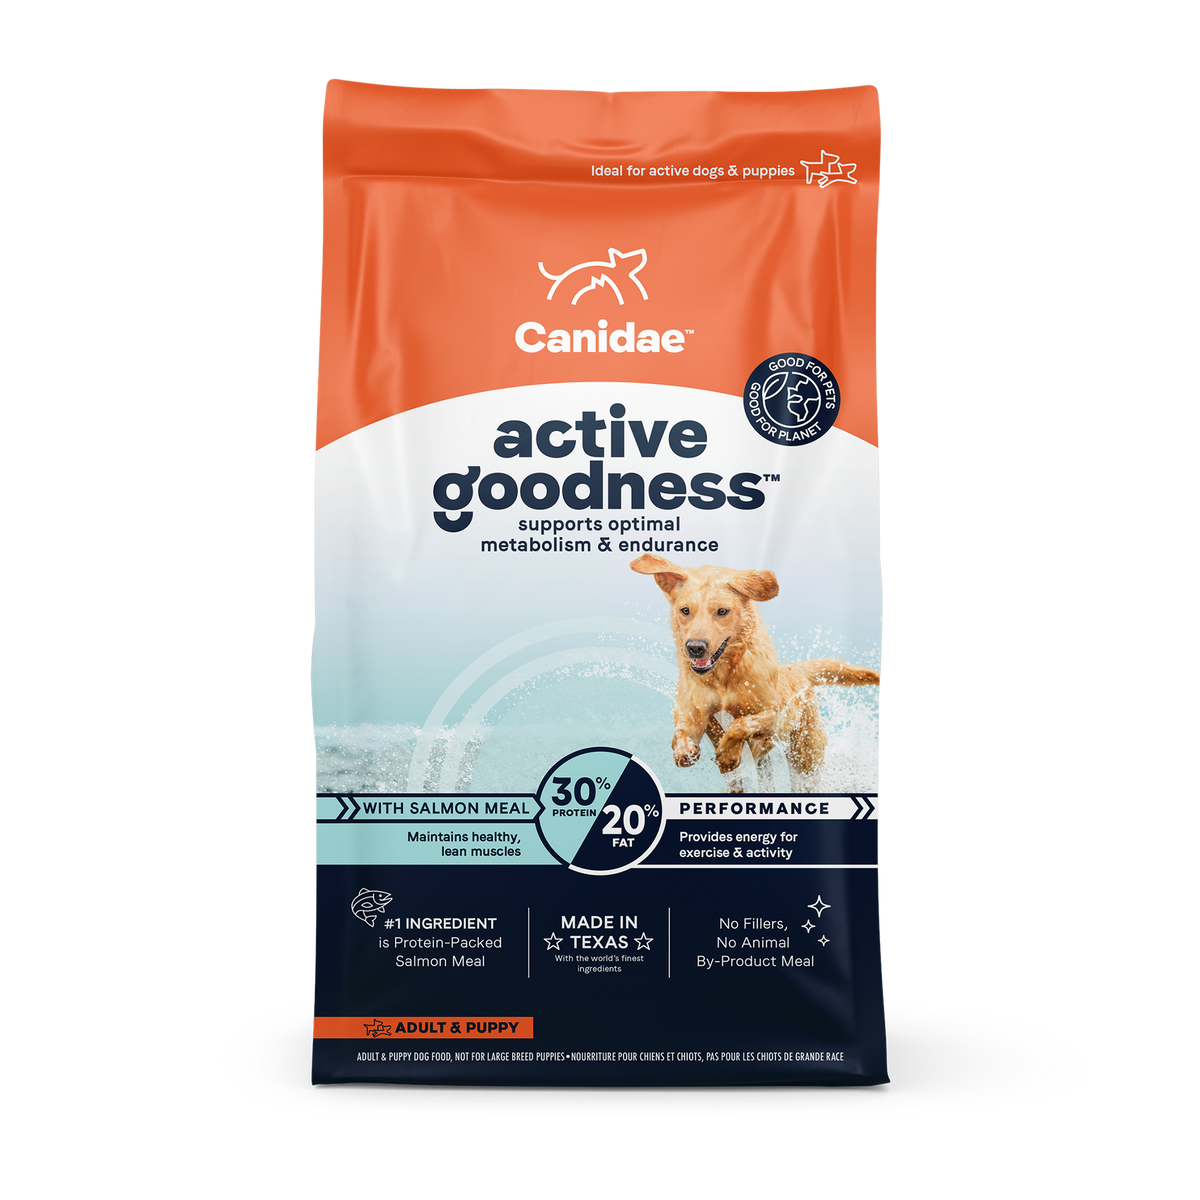 Canidae - Active Goodness Salmon Meal Dry Dog Food